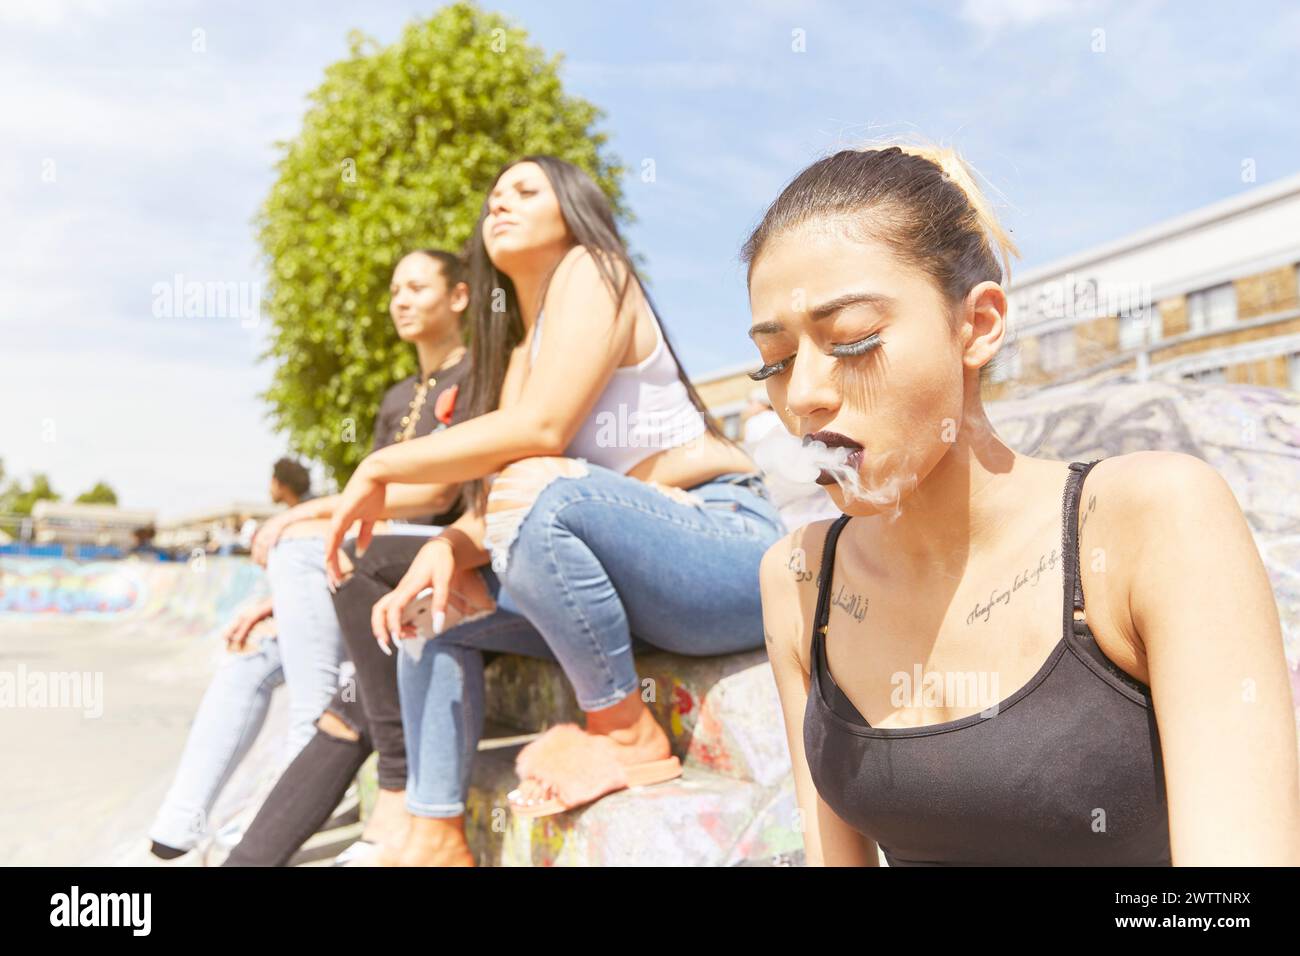 Three people relaxing on a sunny day Stock Photo